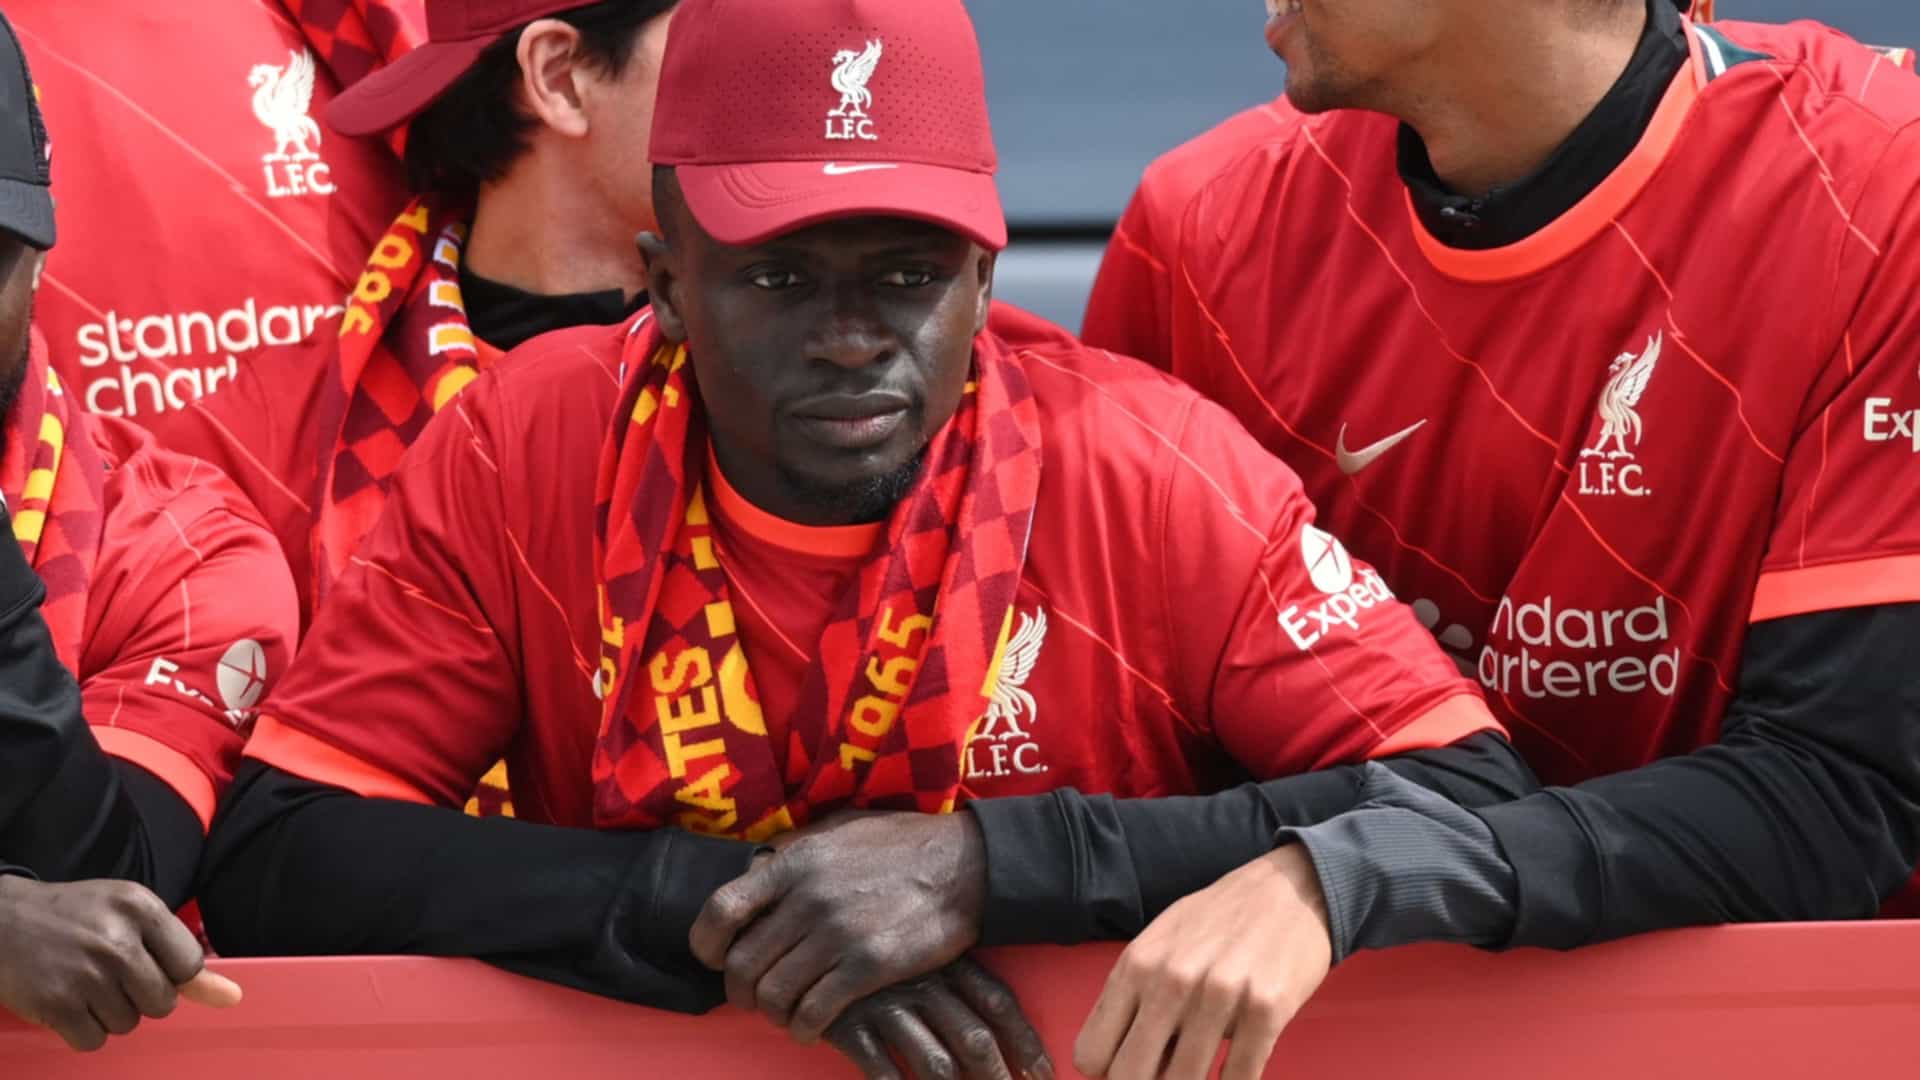 Spartak Moscow make fun of Bayern Munich’s ‘laughable’ offer for Liverpool star Sadio Mane, with parody deal featuring add-ons ‘if Man United win trophy’ and ‘if Lionel Messi joins Real Madrid’